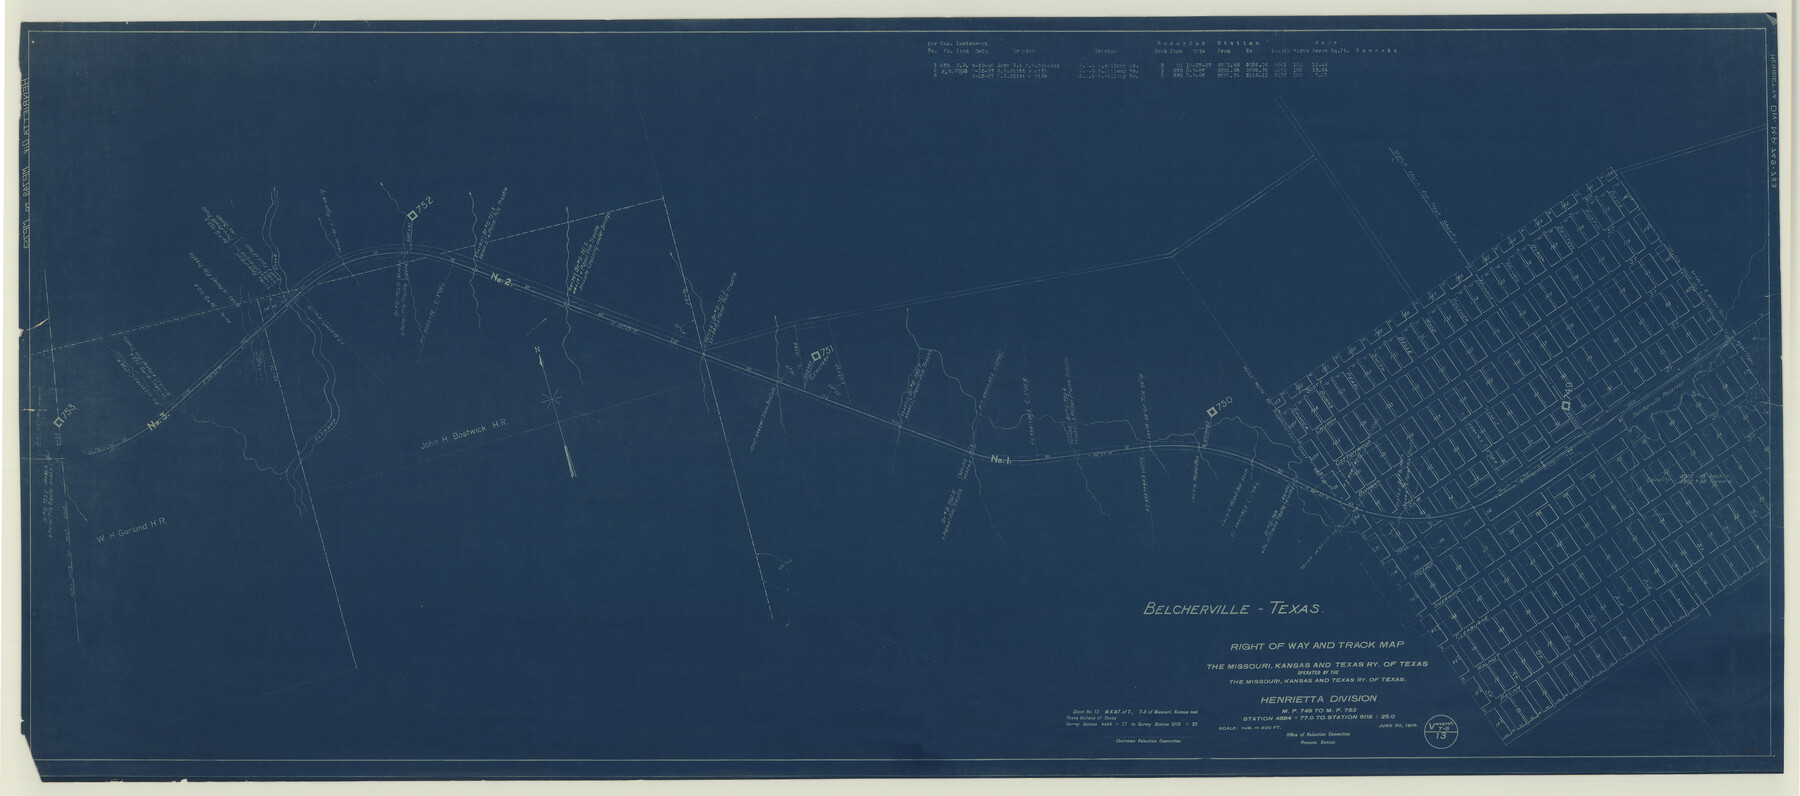 64072, Right of Way and Track Map, The Missouri, Kansas and Texas Ry. of Texas operated by the Missouri, Kansas and Texas Ry. of Texas, Henrietta Division, General Map Collection